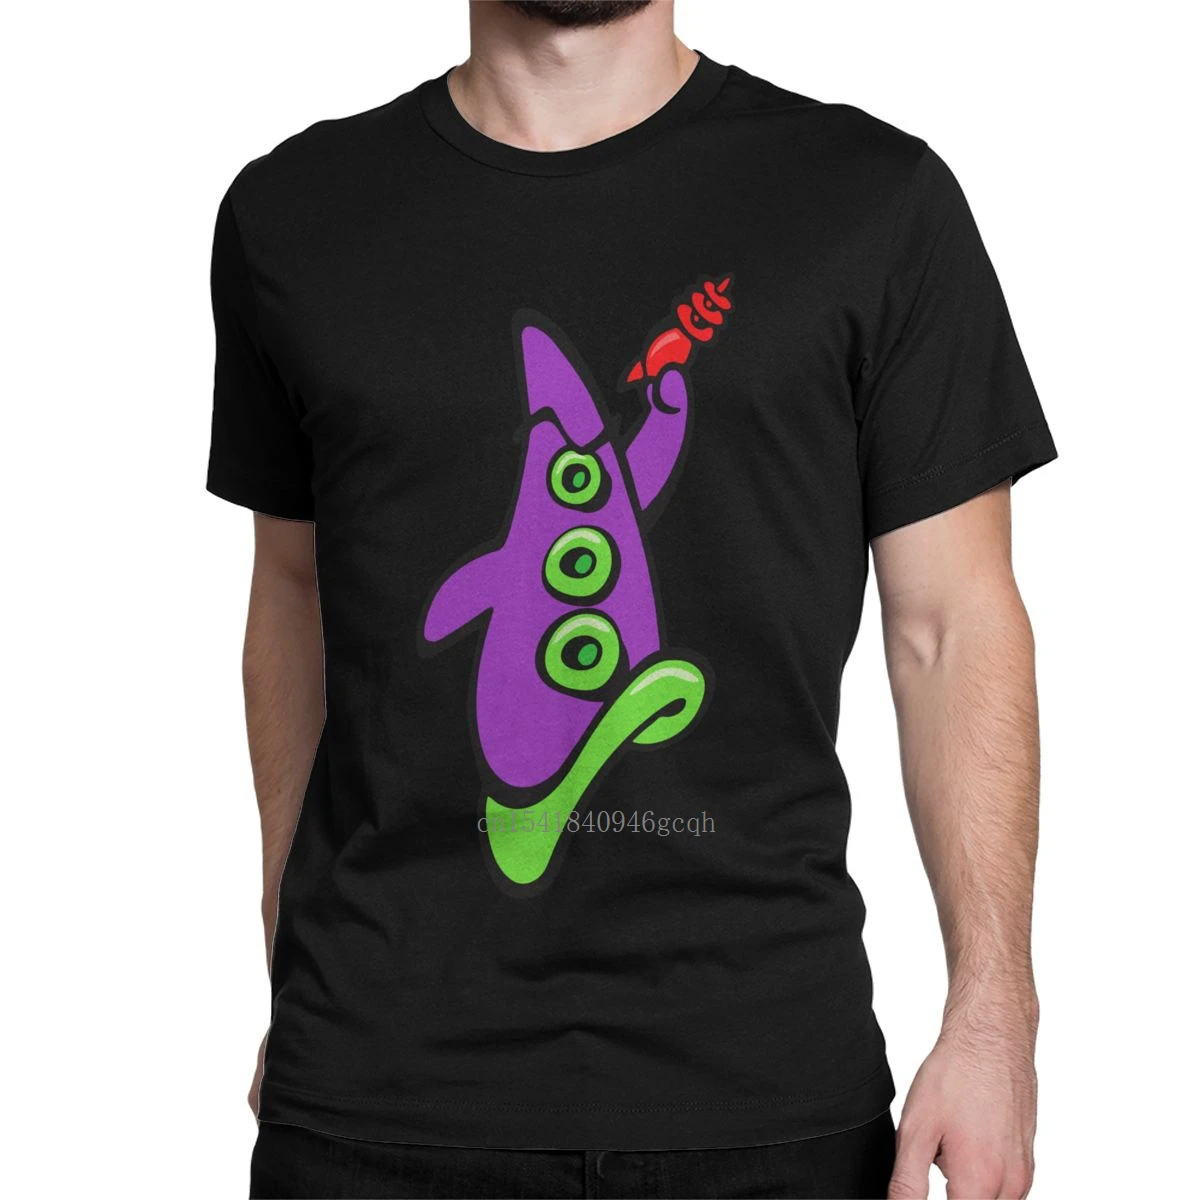 

Maniac Mansion Day Of The Tentacle T Shirt Men's 100% Cotton Vintage T-Shirt O Neck Adventure Computer Game Tee Tops New Arrival